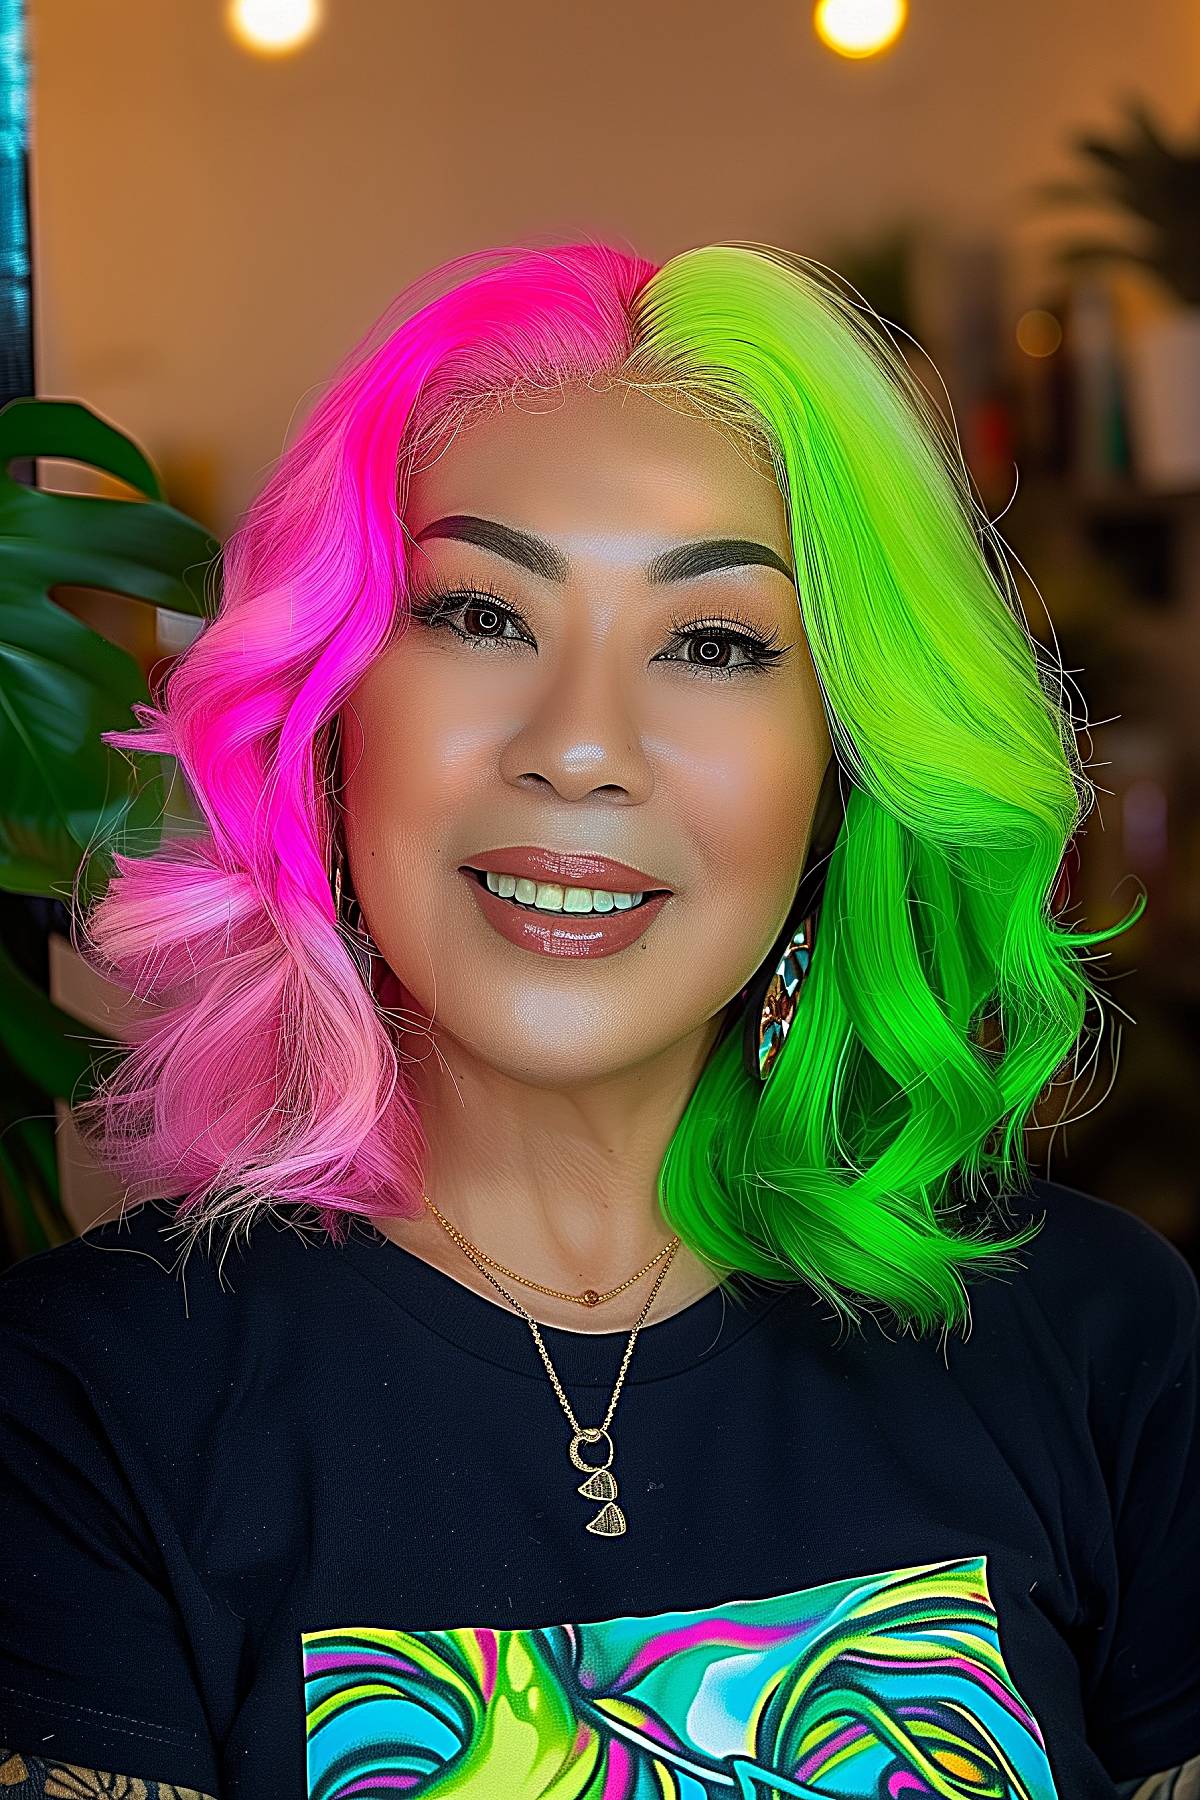 Short, curly hair with a bold contrast of hot pink and electric green, reflecting a lively Gemini spirit.